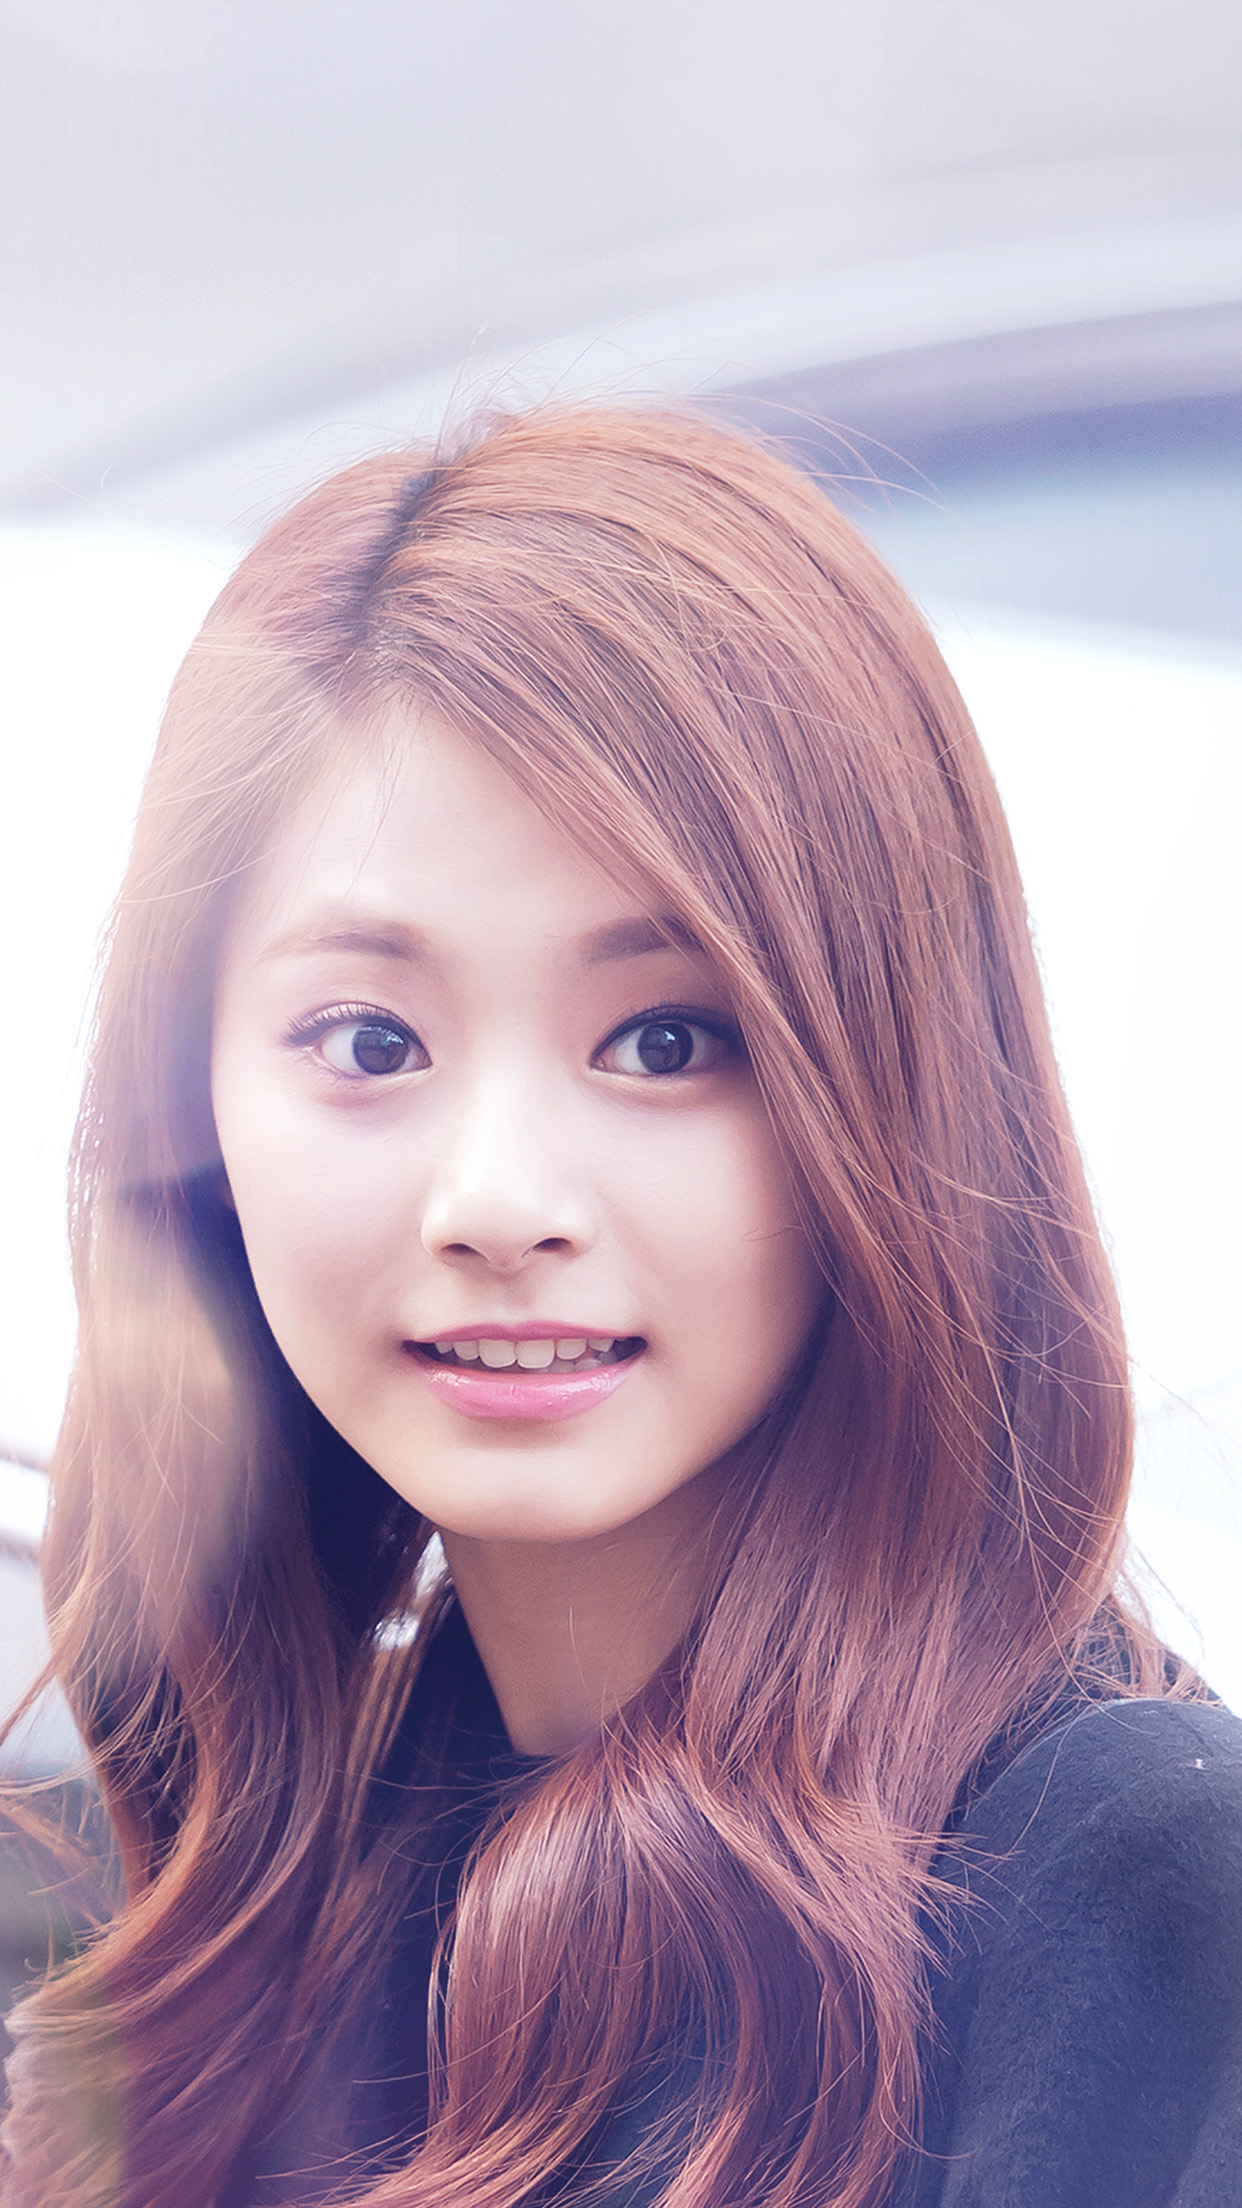 Tzuyu Twice Smile Cute Kpop Jyp Flare Android wallpaper